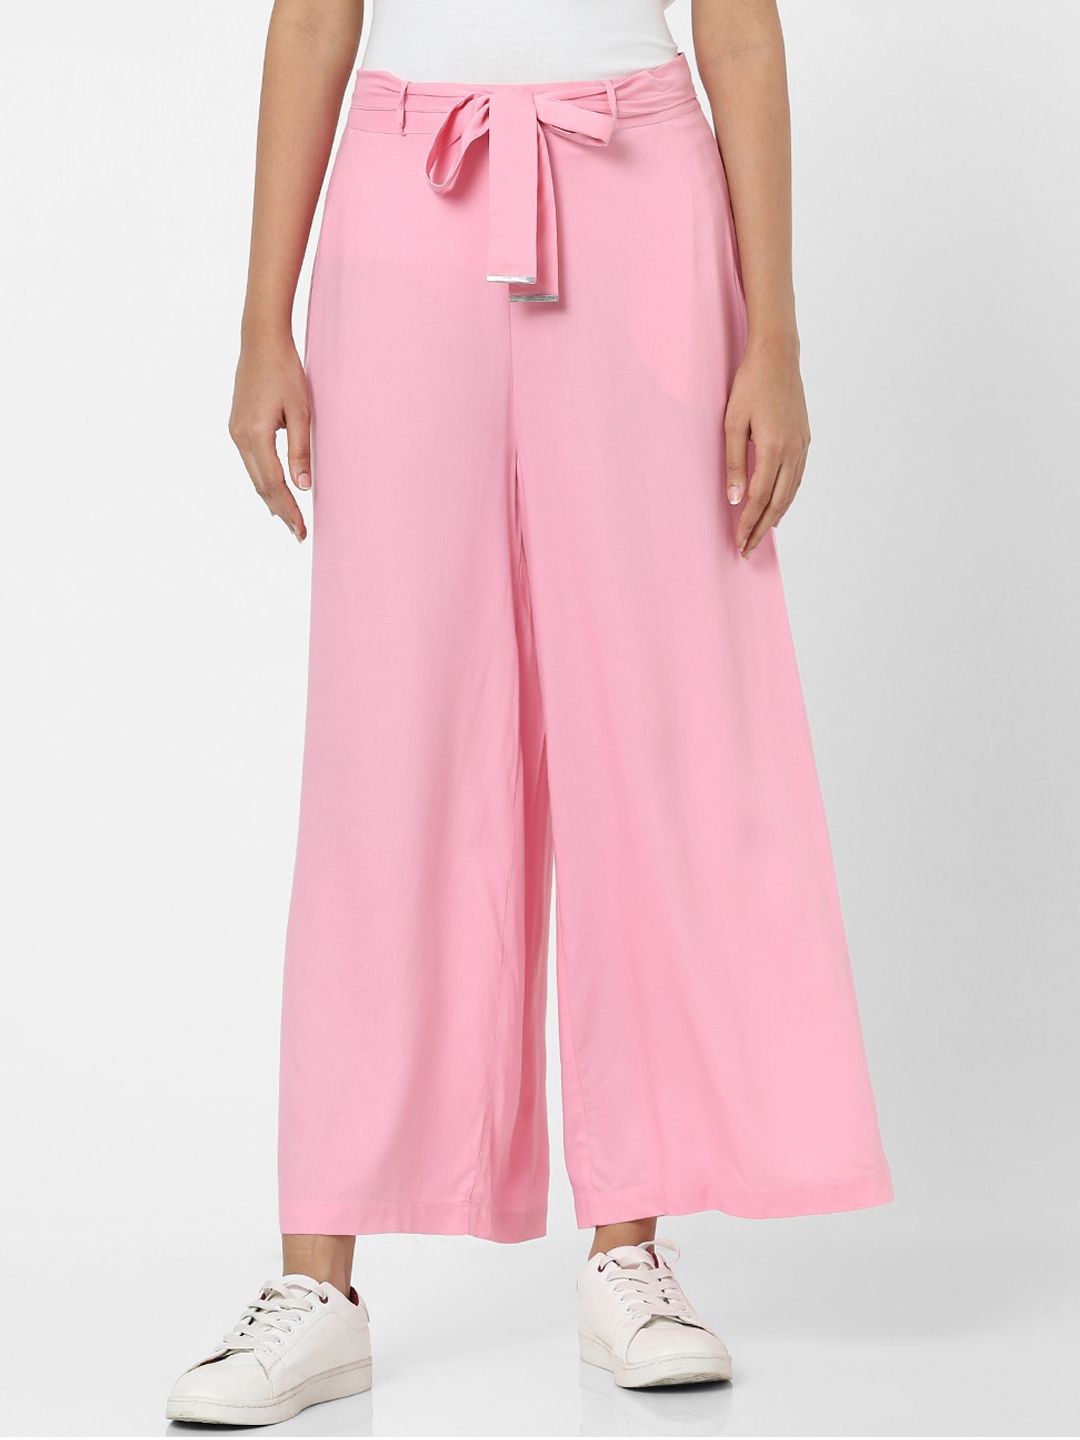 Vero Moda Women Pink Solid Parallel Trousers Price in India